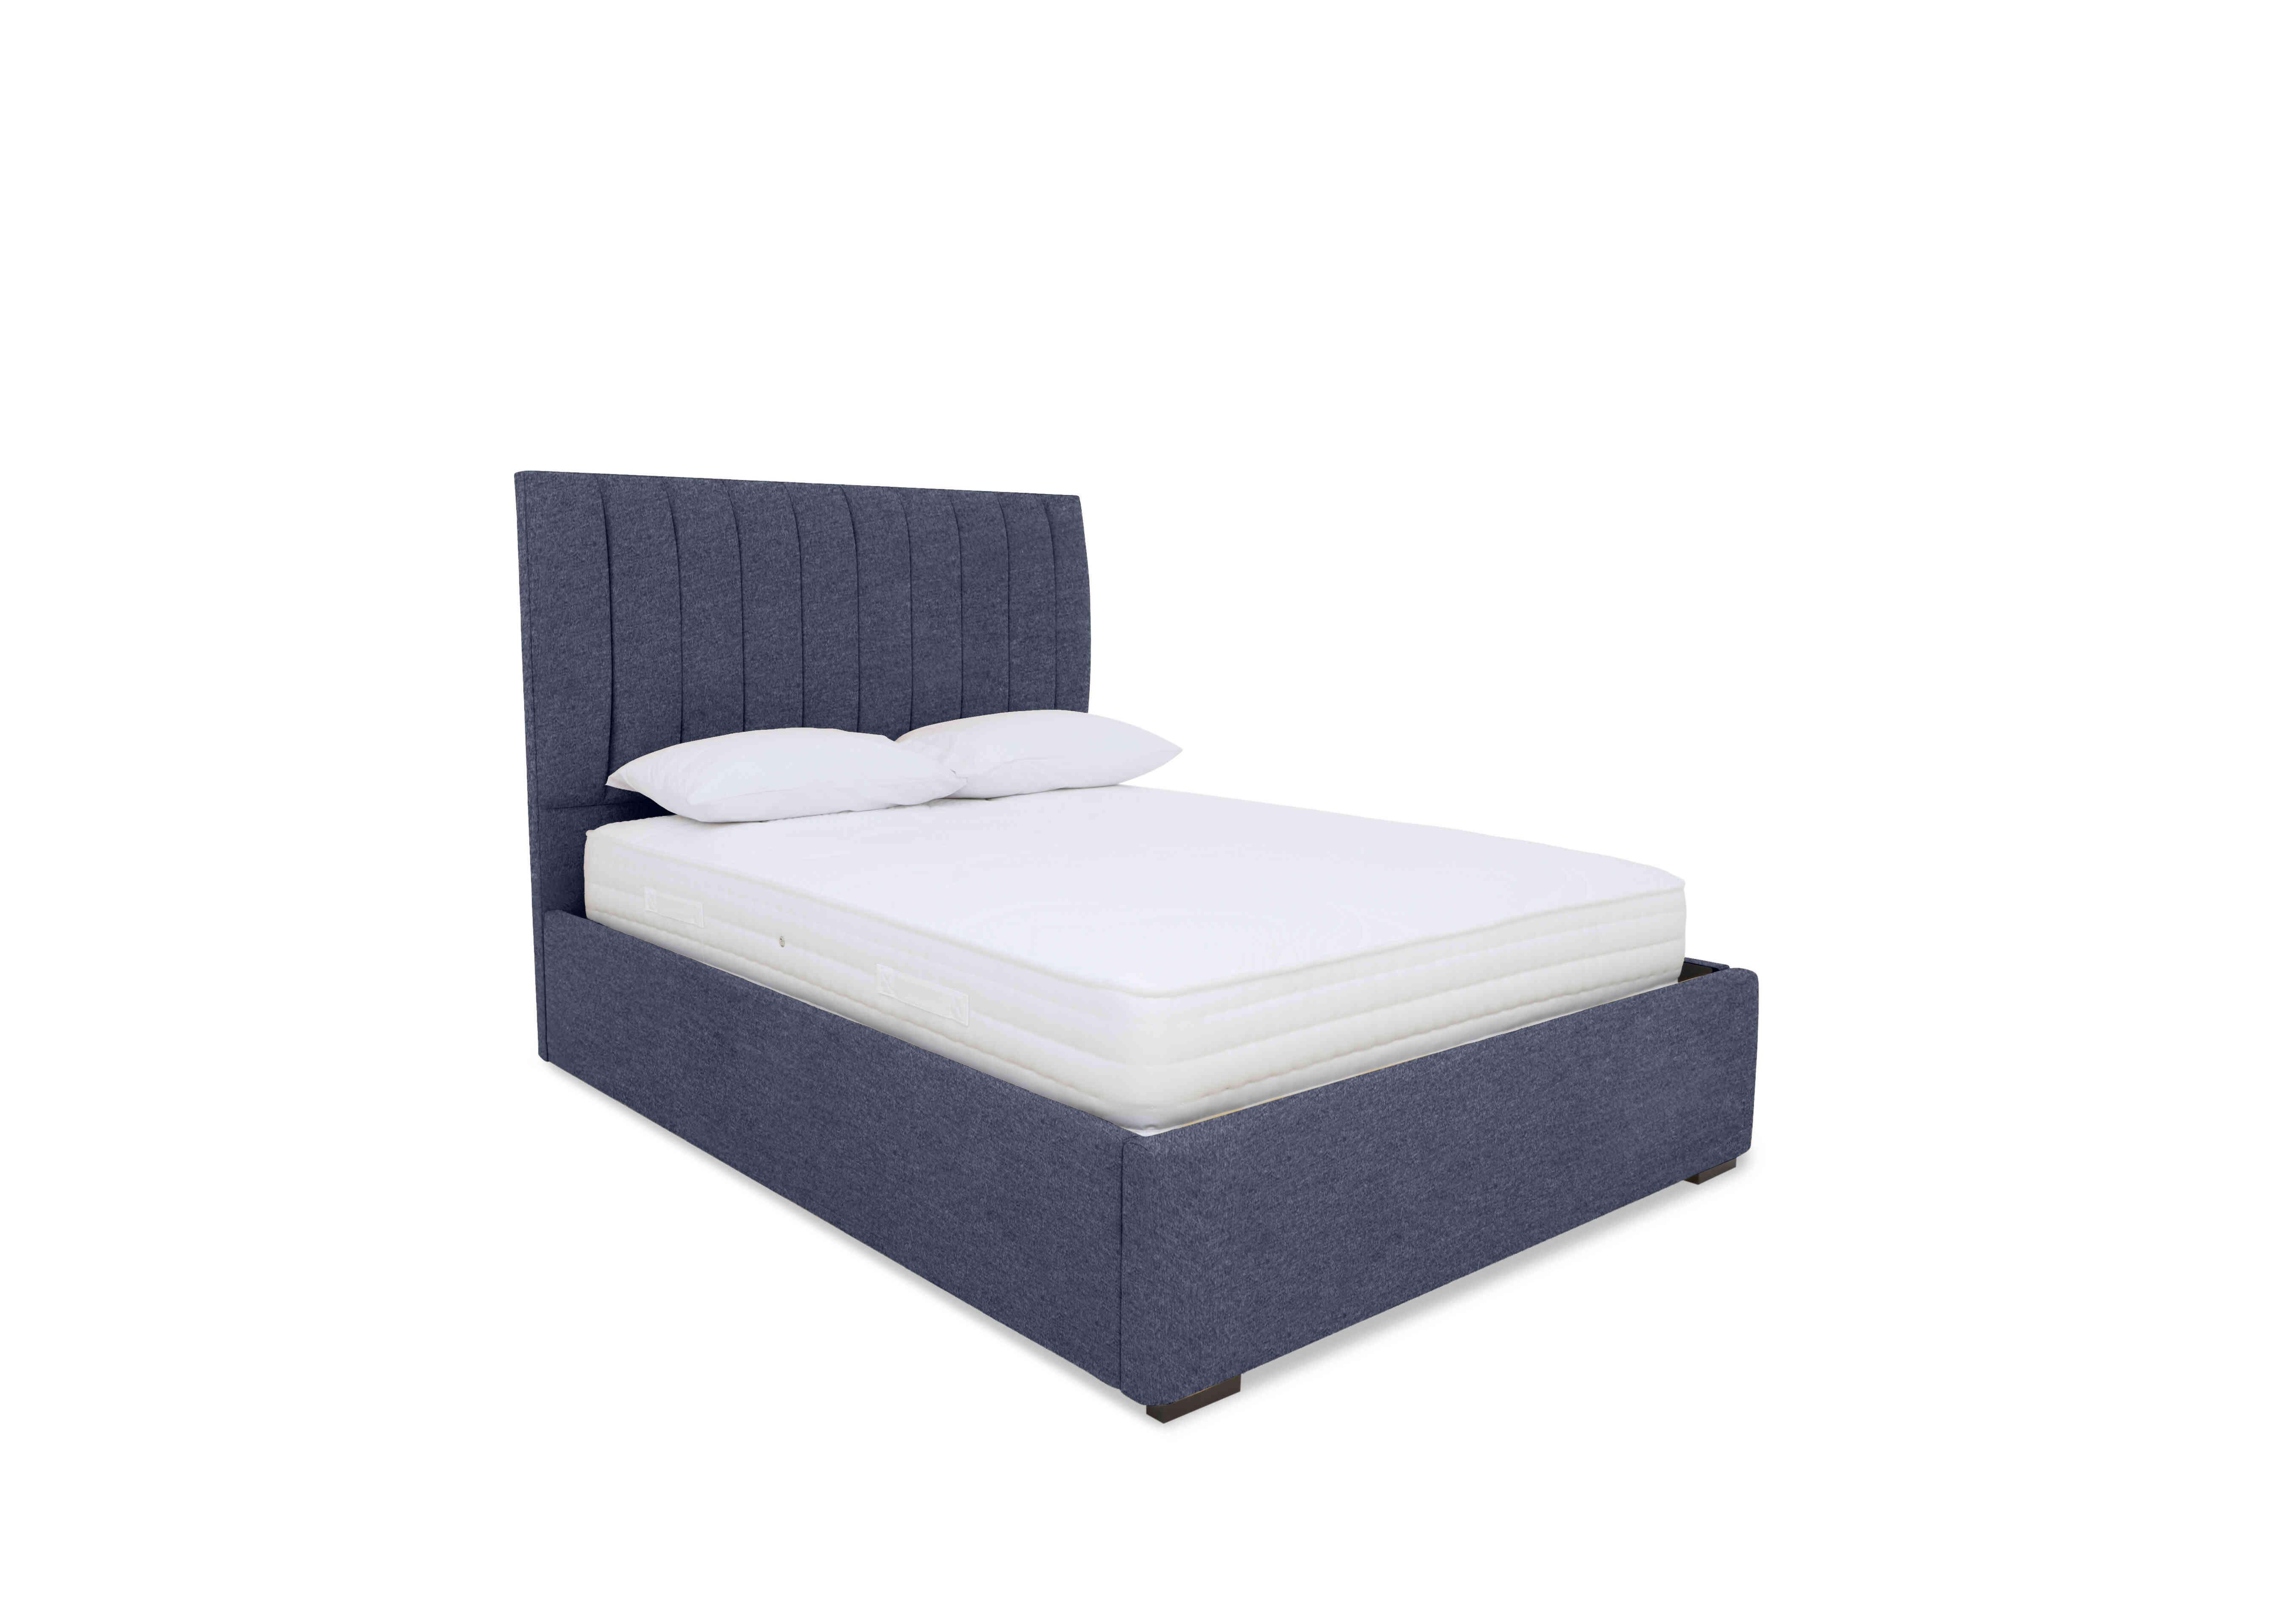 Dickens Ottoman Bed Frame in Grace Marine on Furniture Village